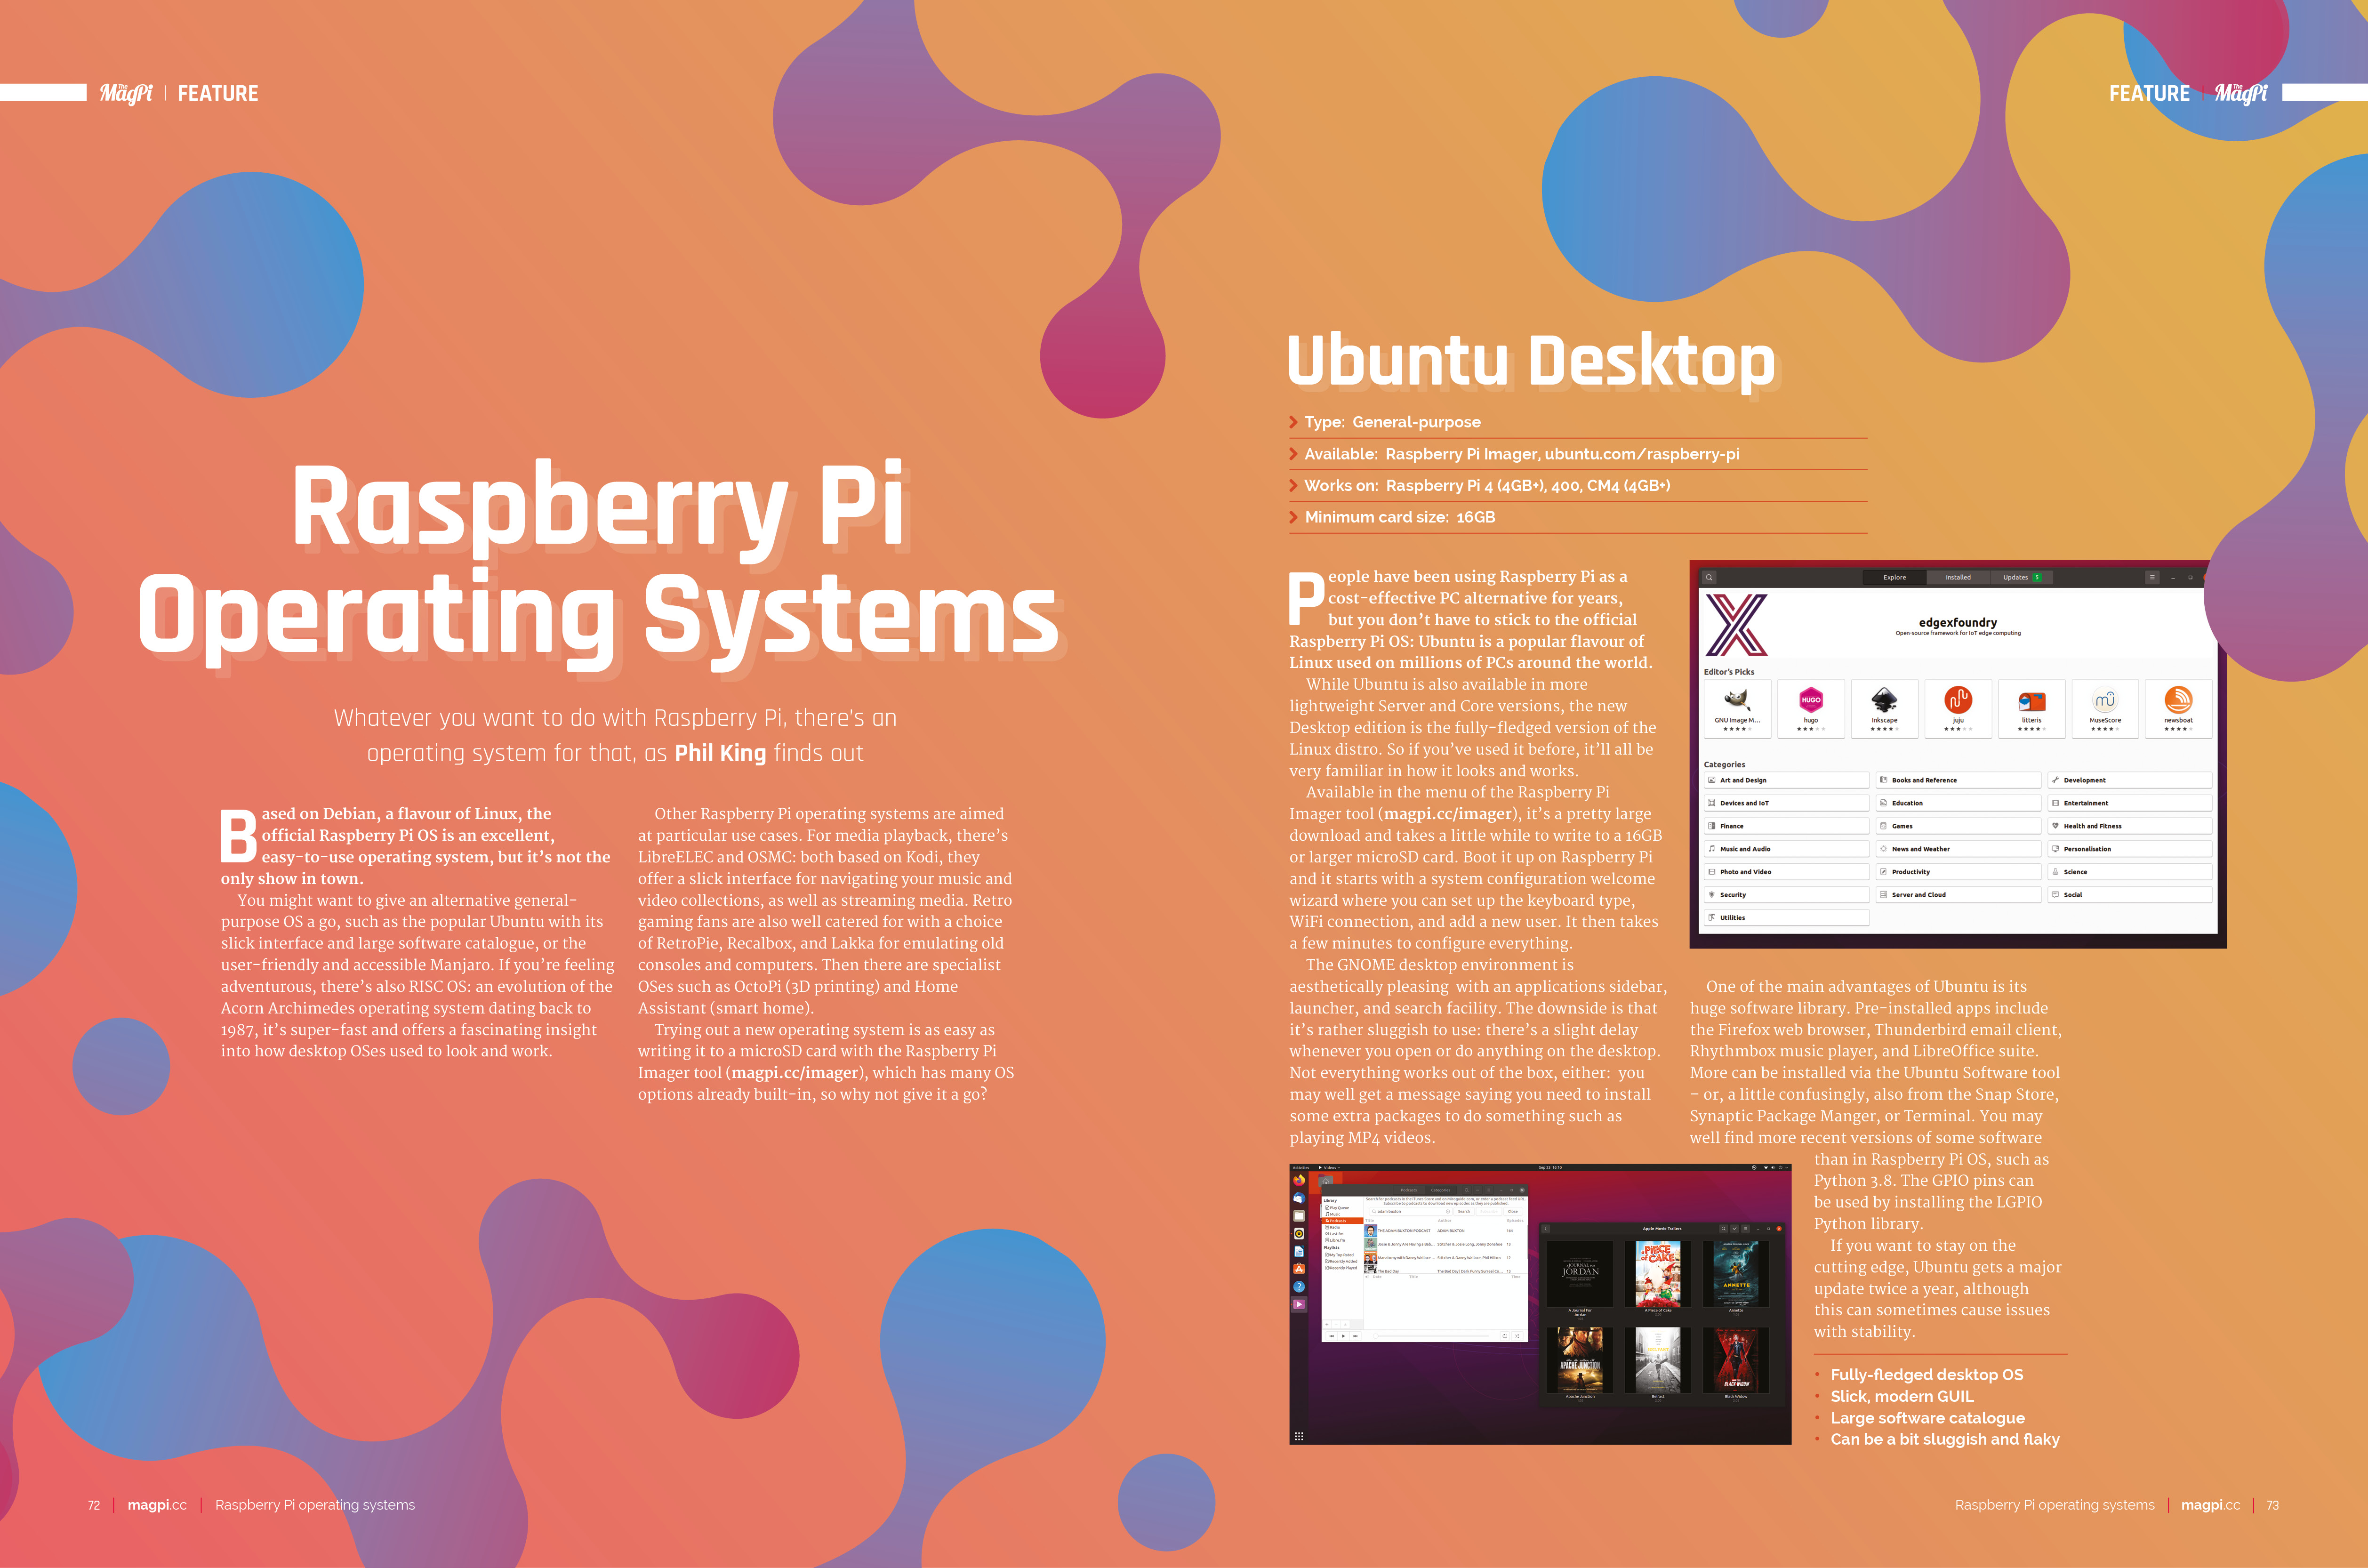 Raspberry Pi operating systems